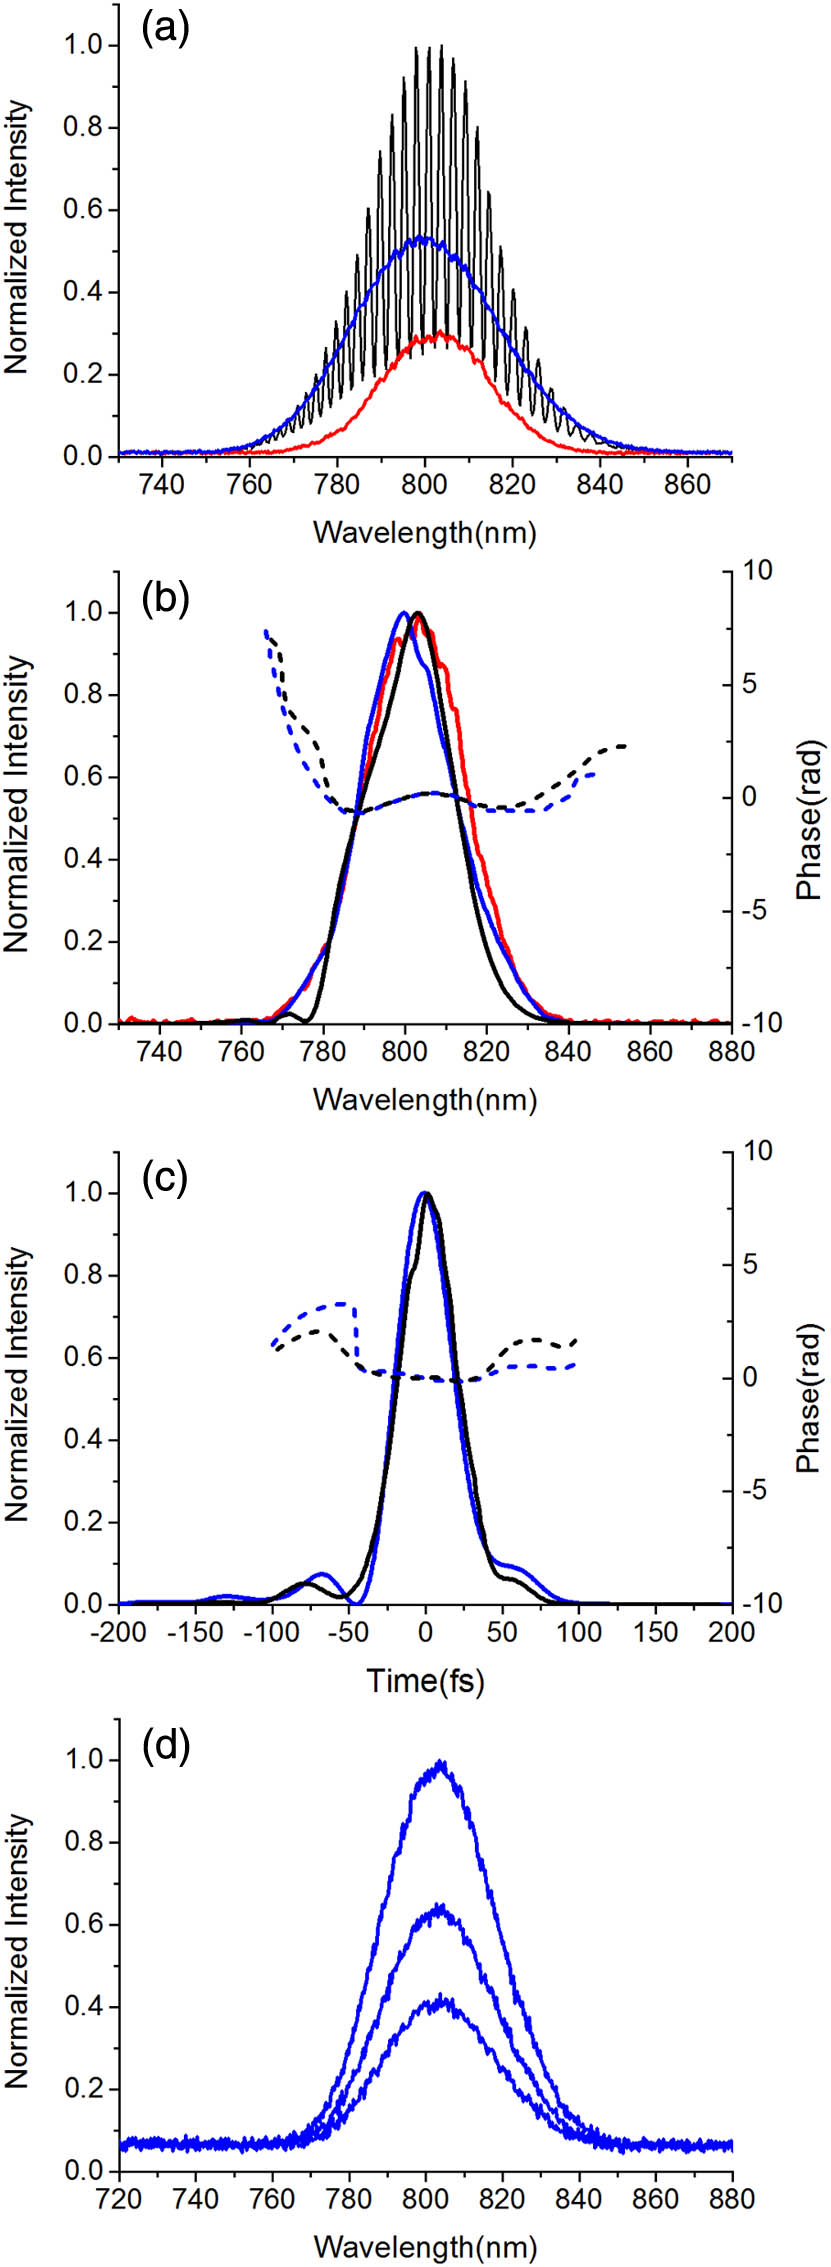 (a) Spectral intensity of the test beam (red curve), the TG signal (blue curve), and the interference between them (black curve) measured directly with the spectrometer. (b) The spectrum retrieved (black solid curve) and the spectral phase (black dotted curve) by using TG-SRSI. The spectrum retrieved (blue solid curve) and the spectral phase retrieved (blue dotted curve) by using SHG-FROG. The red curve is the spectrum of the test beam measured directly by the spectrometer. (c) The temporal profiles (solid curves) and phases (dashed curves) retrieved by using TG-SRSI (black curves) and SHG-FROG (blue curves). (d) Spectra of three TG signals measured directly by the spectrometer. Spectra from the bottom to the top correspond to when the input pulse energies are 65, 75, and 85 nJ, respectively.